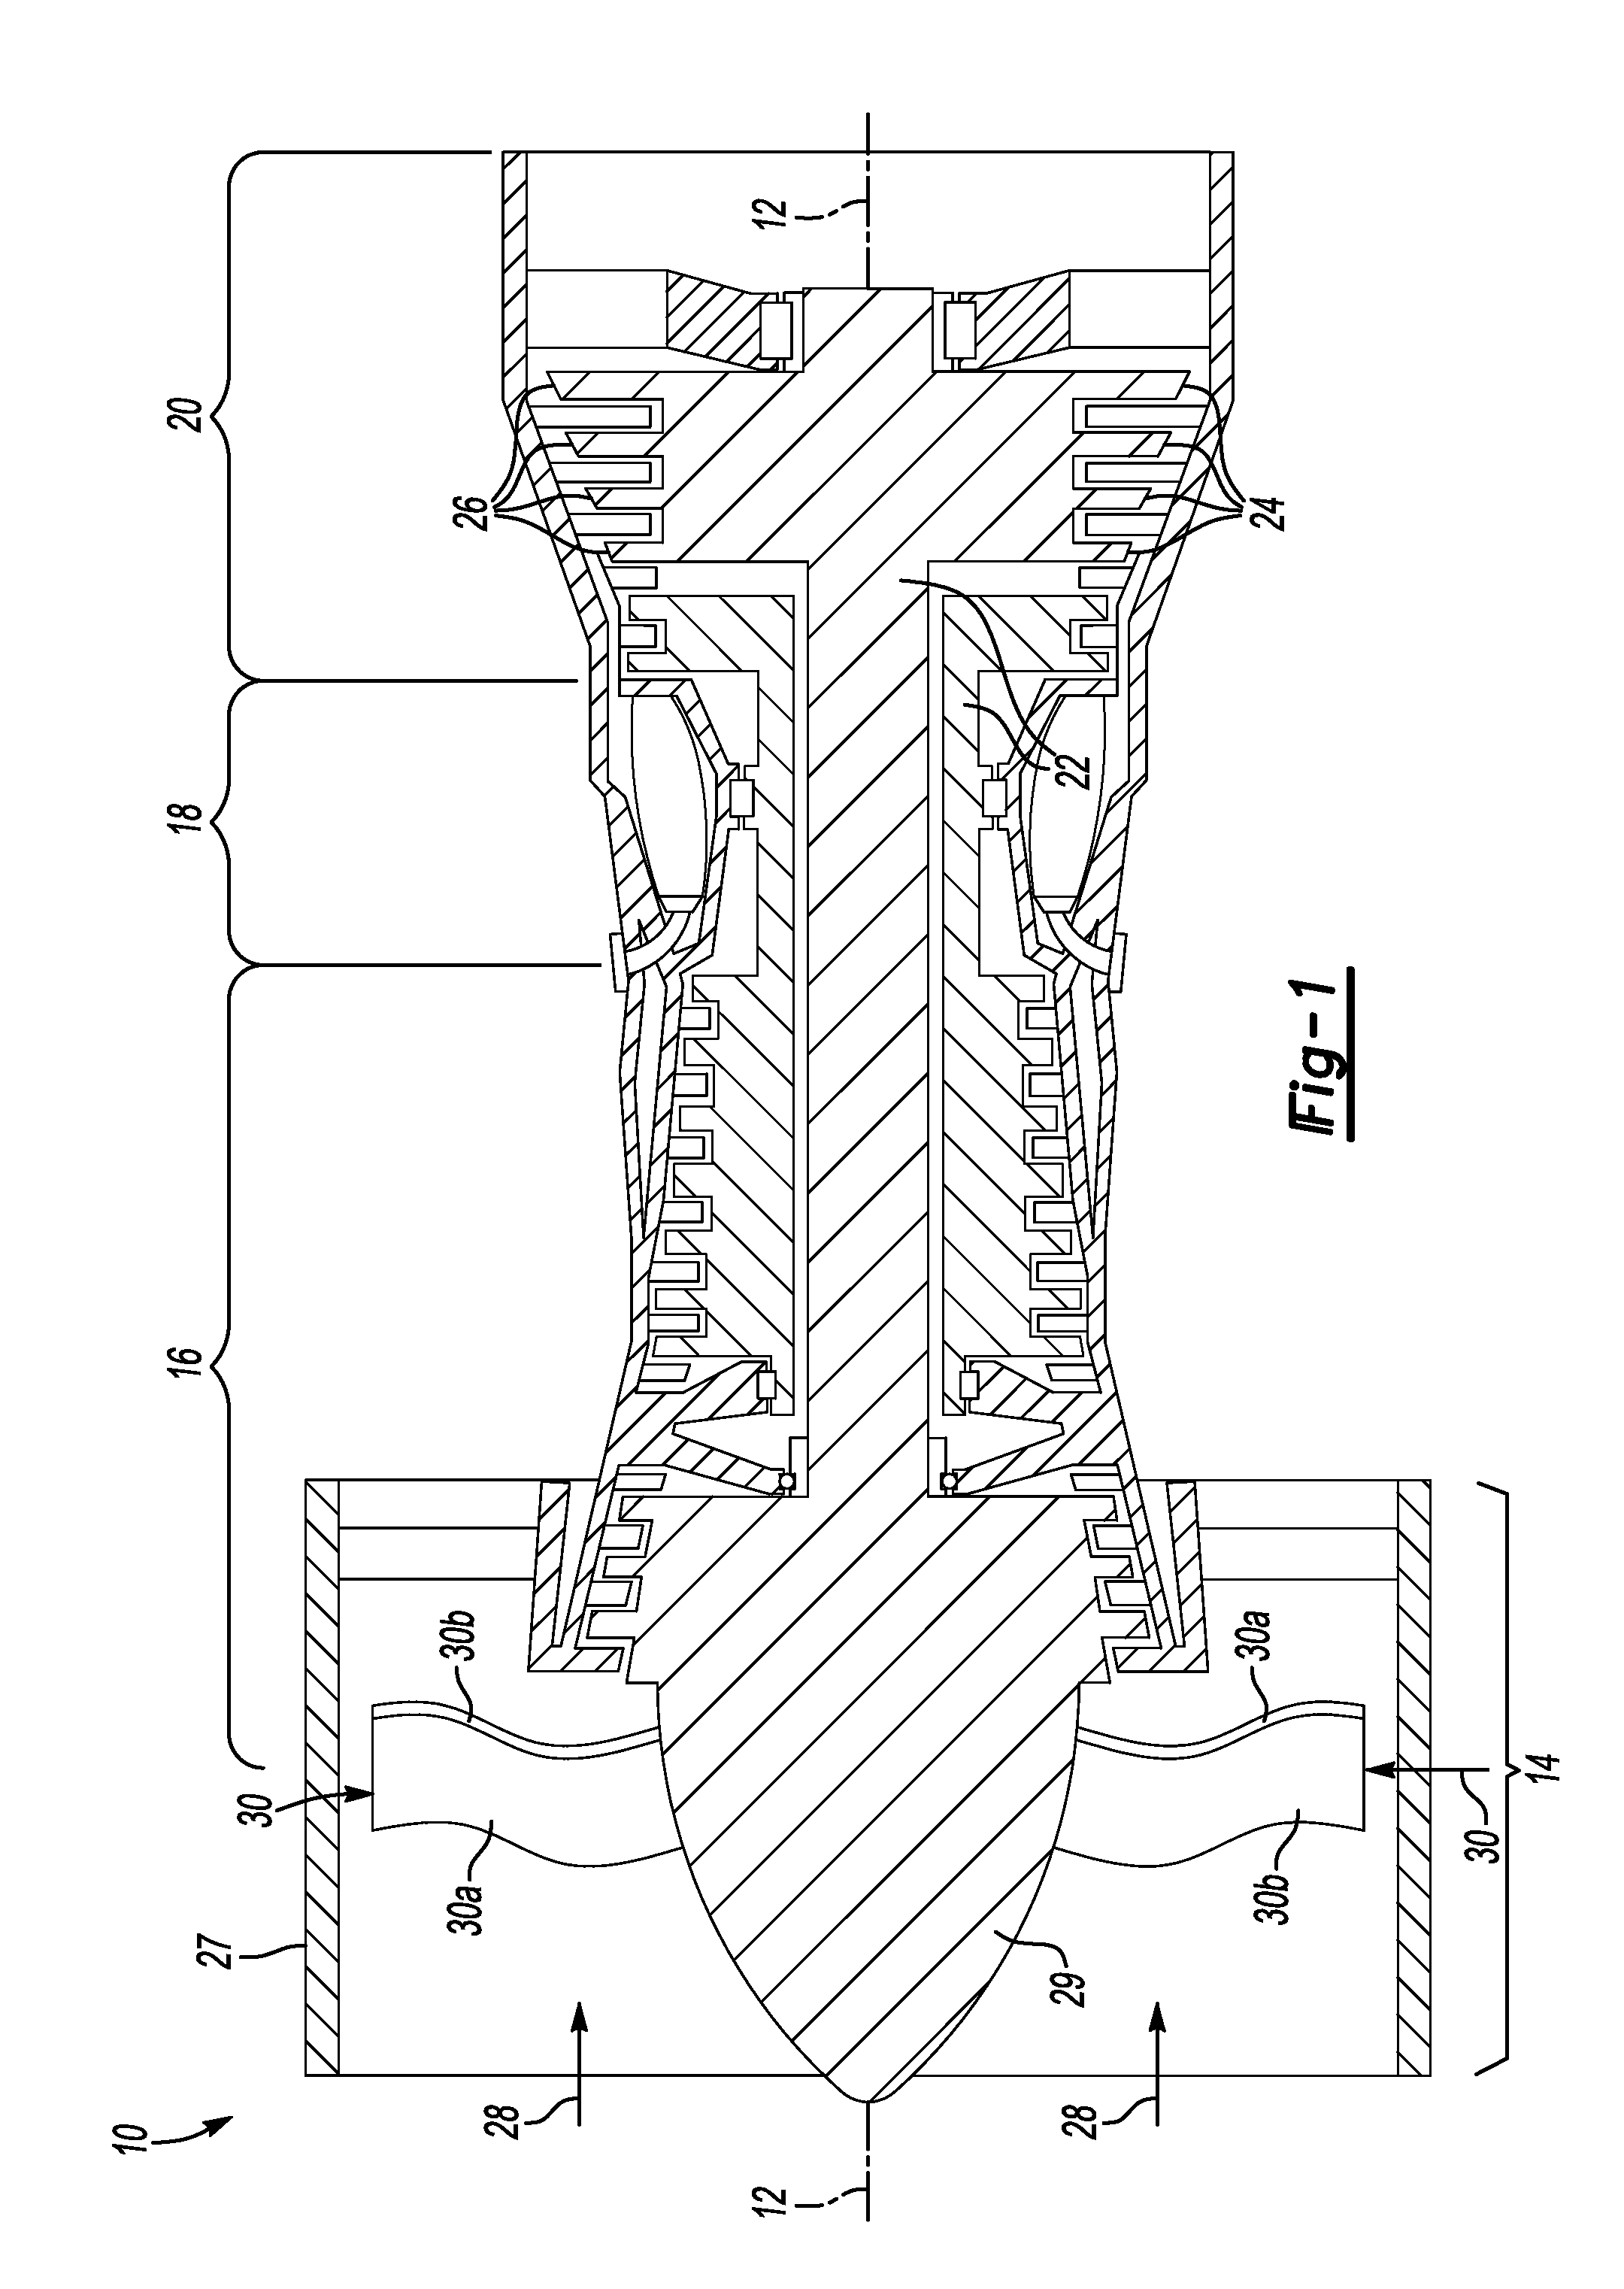 Method for making a hollow fan blade with machined internal cavities